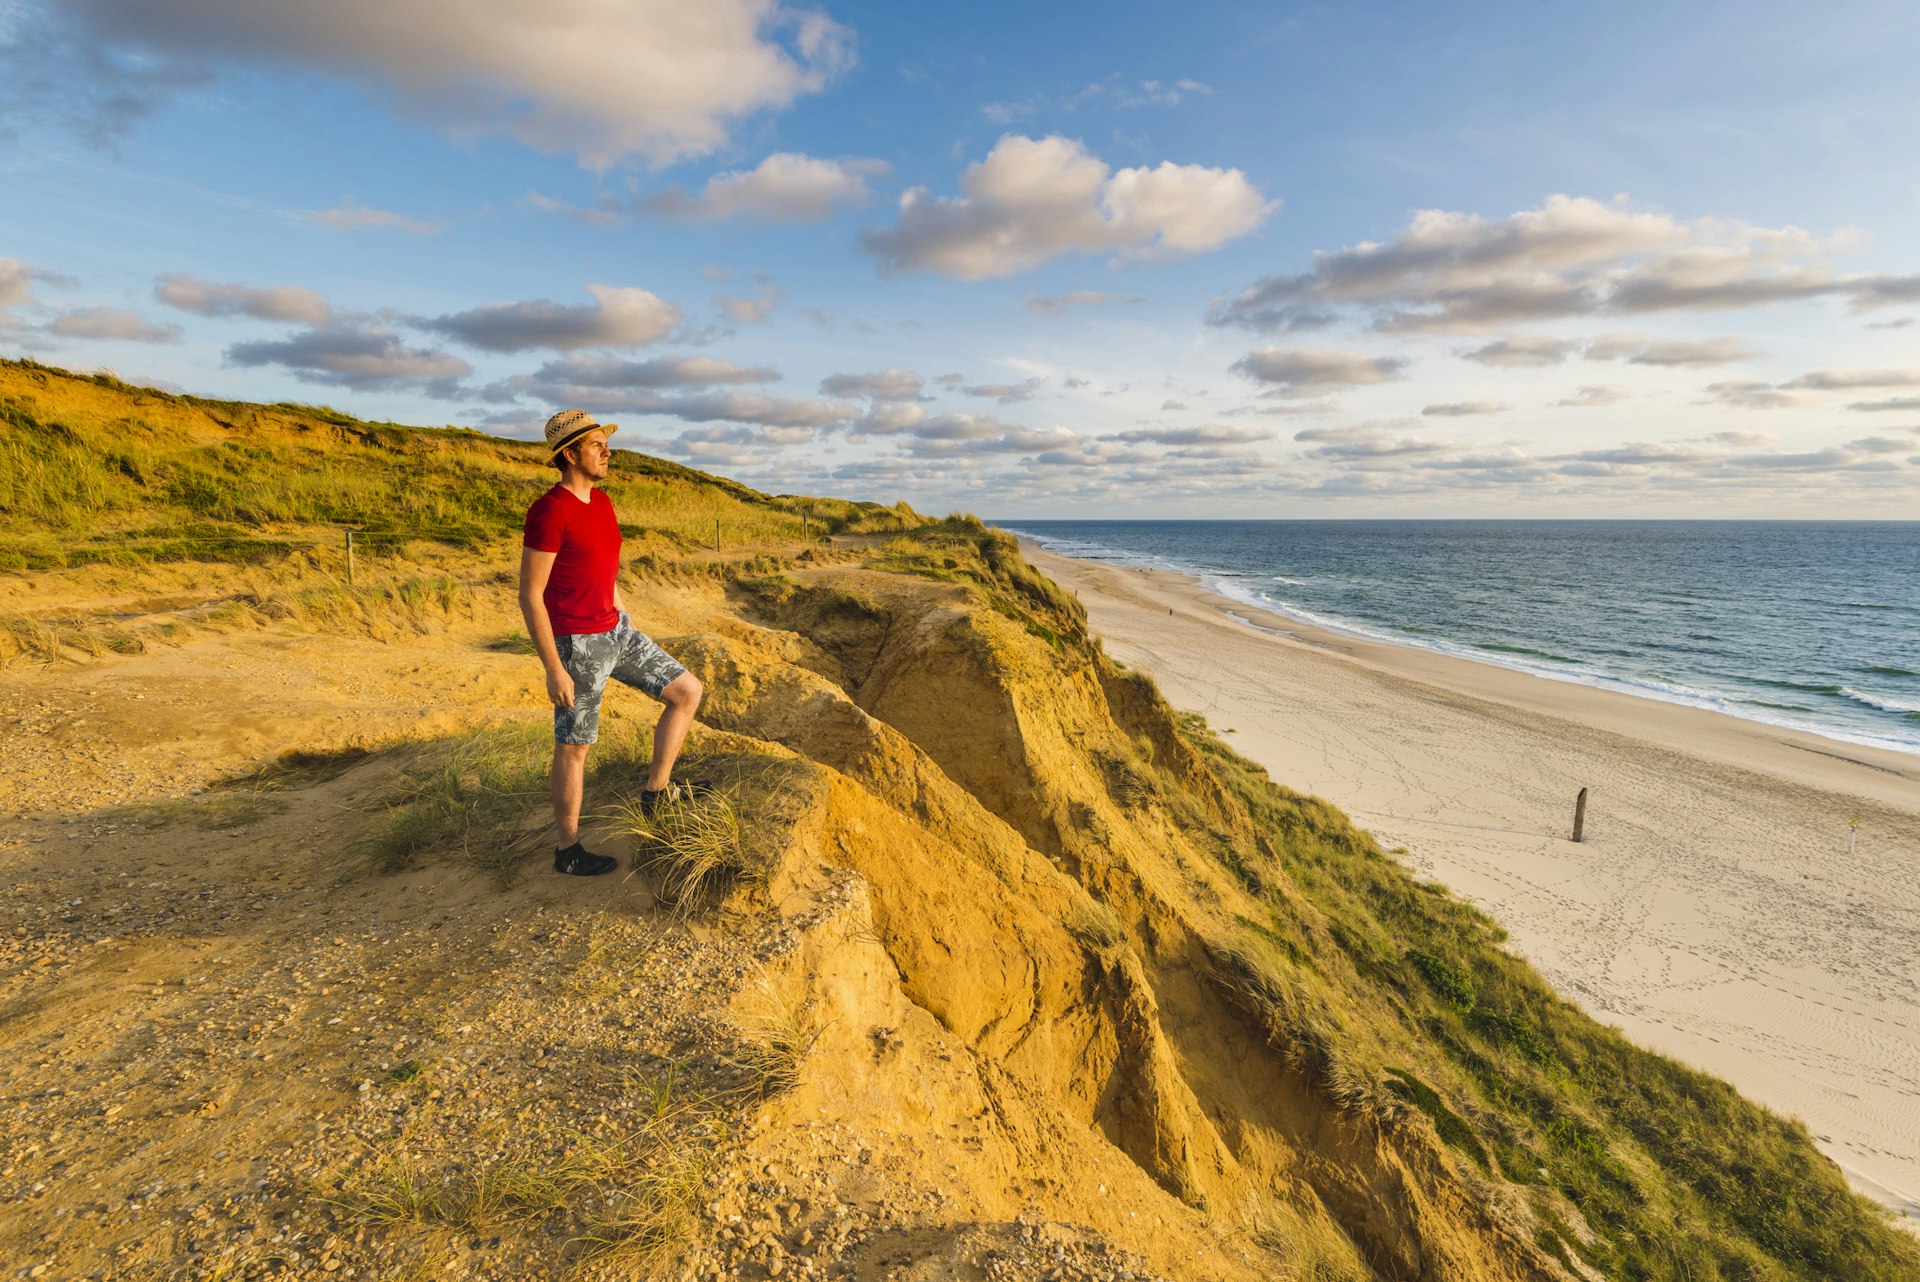 A man stands on a sandy dune and stares out over the beach towards the sea on a sunny day